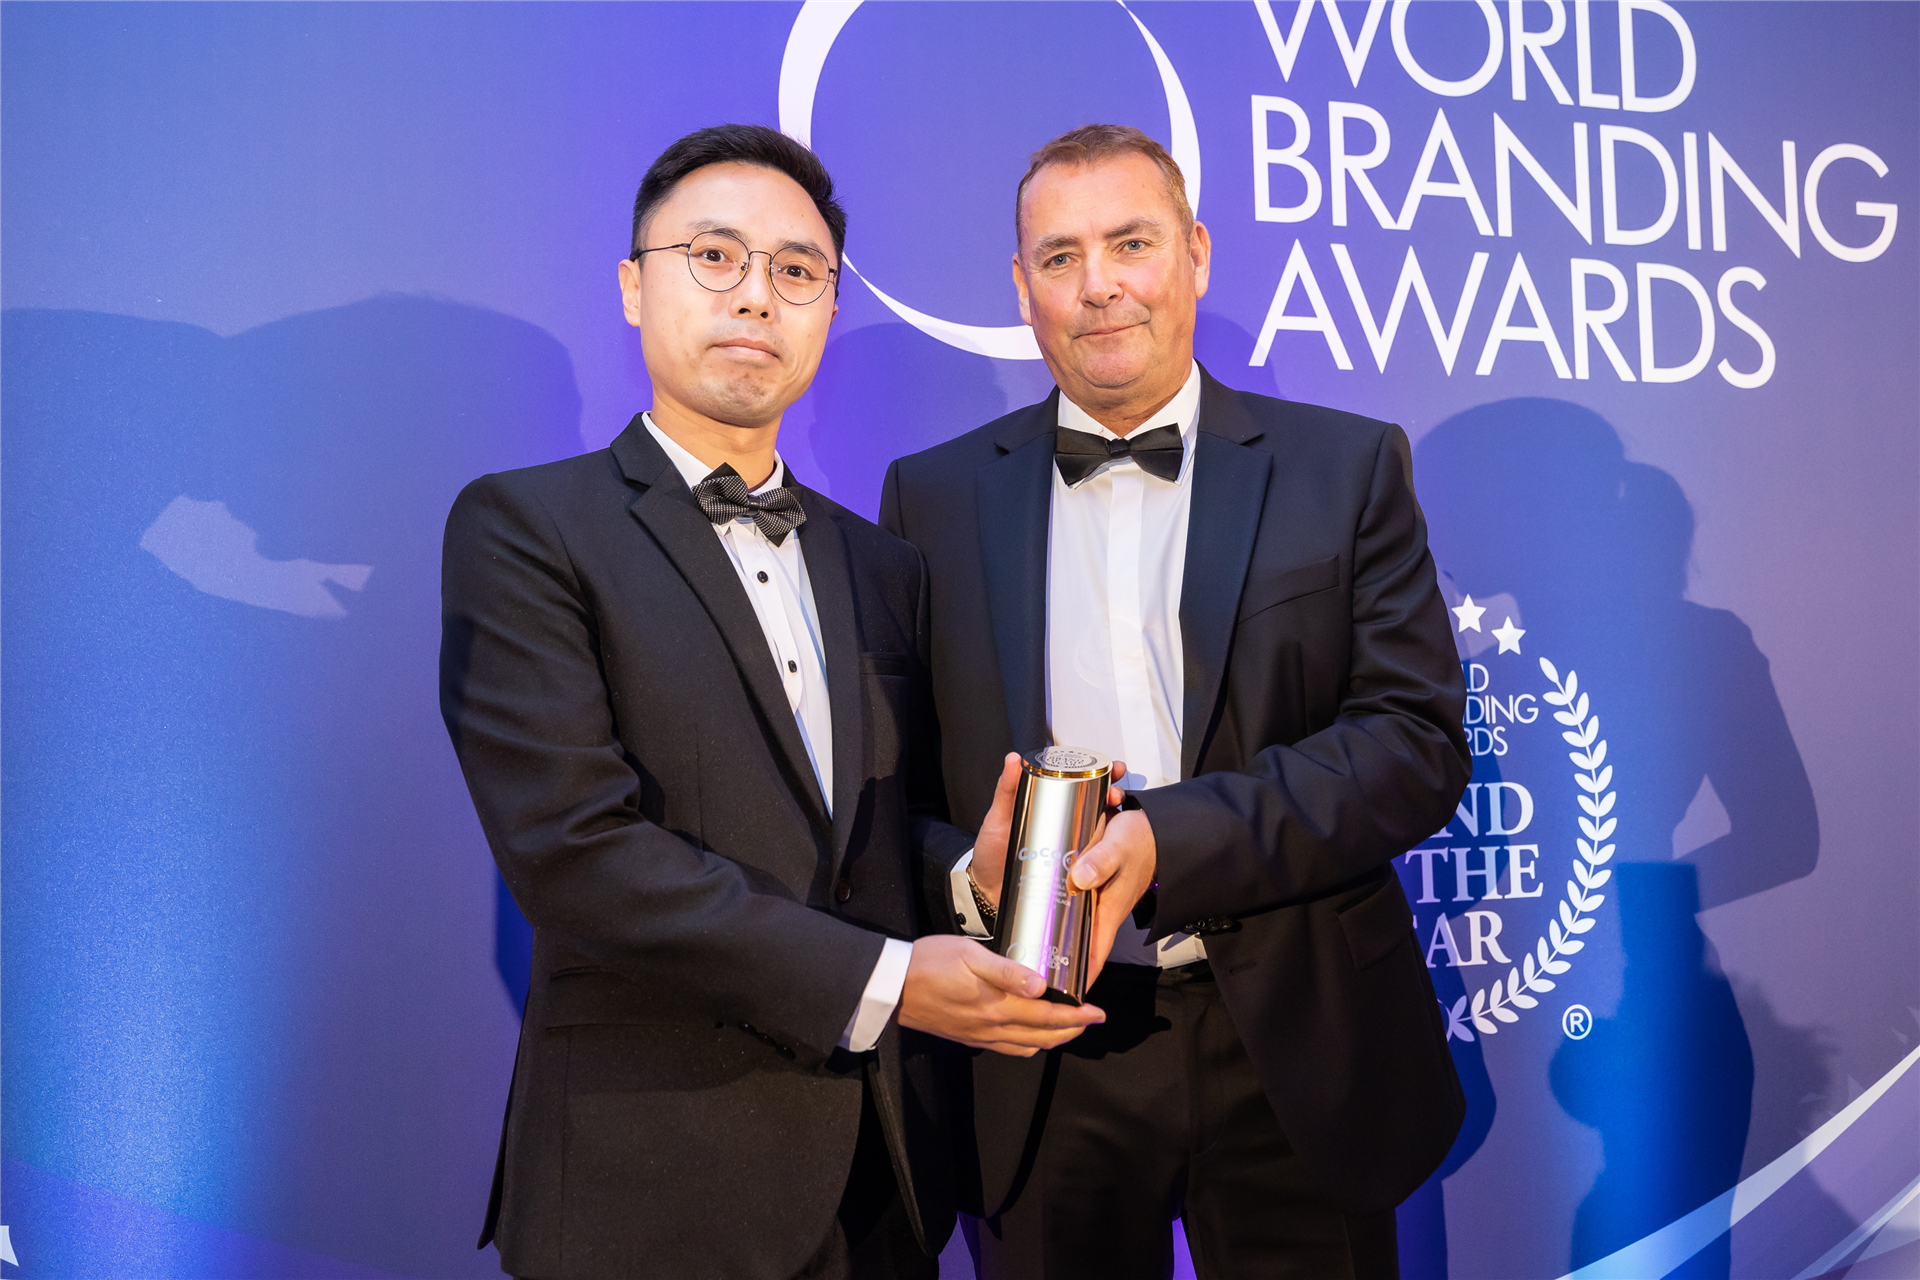 CoCo BD Director Receives Invitation to Accept Award at World Branding Awards